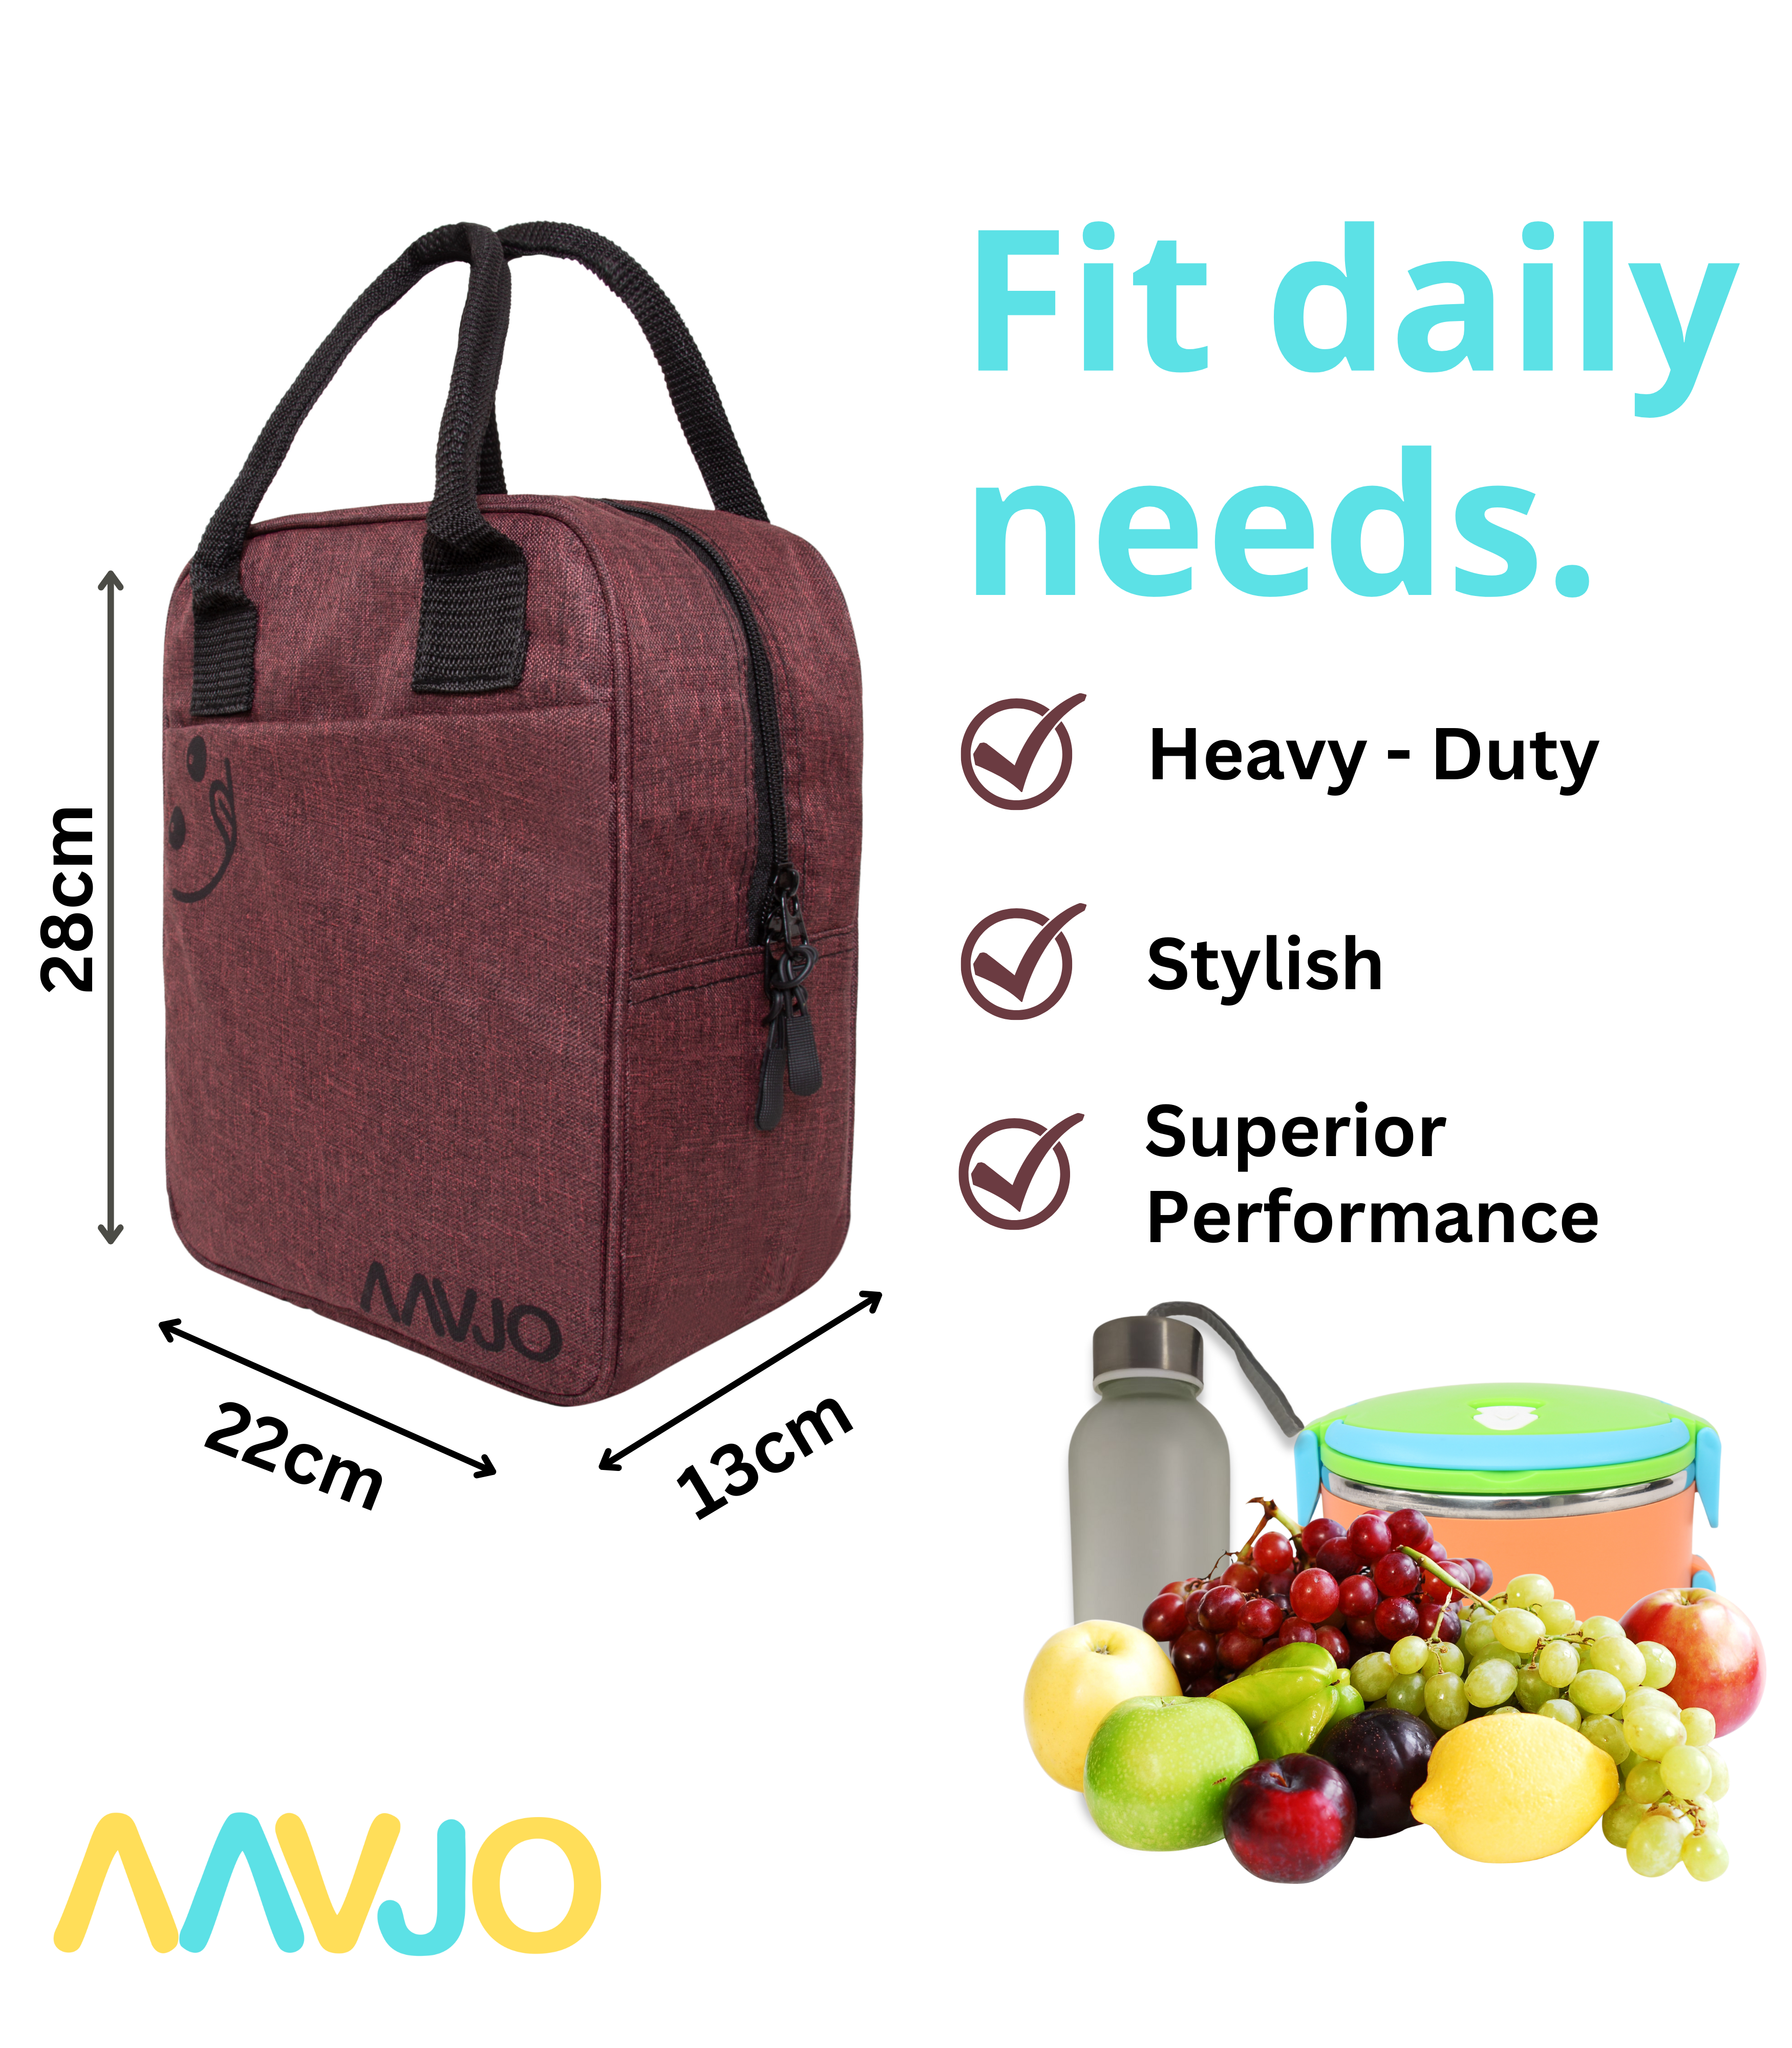 Lunch Bag for Office, Travel, School, Picnic – AAVJO